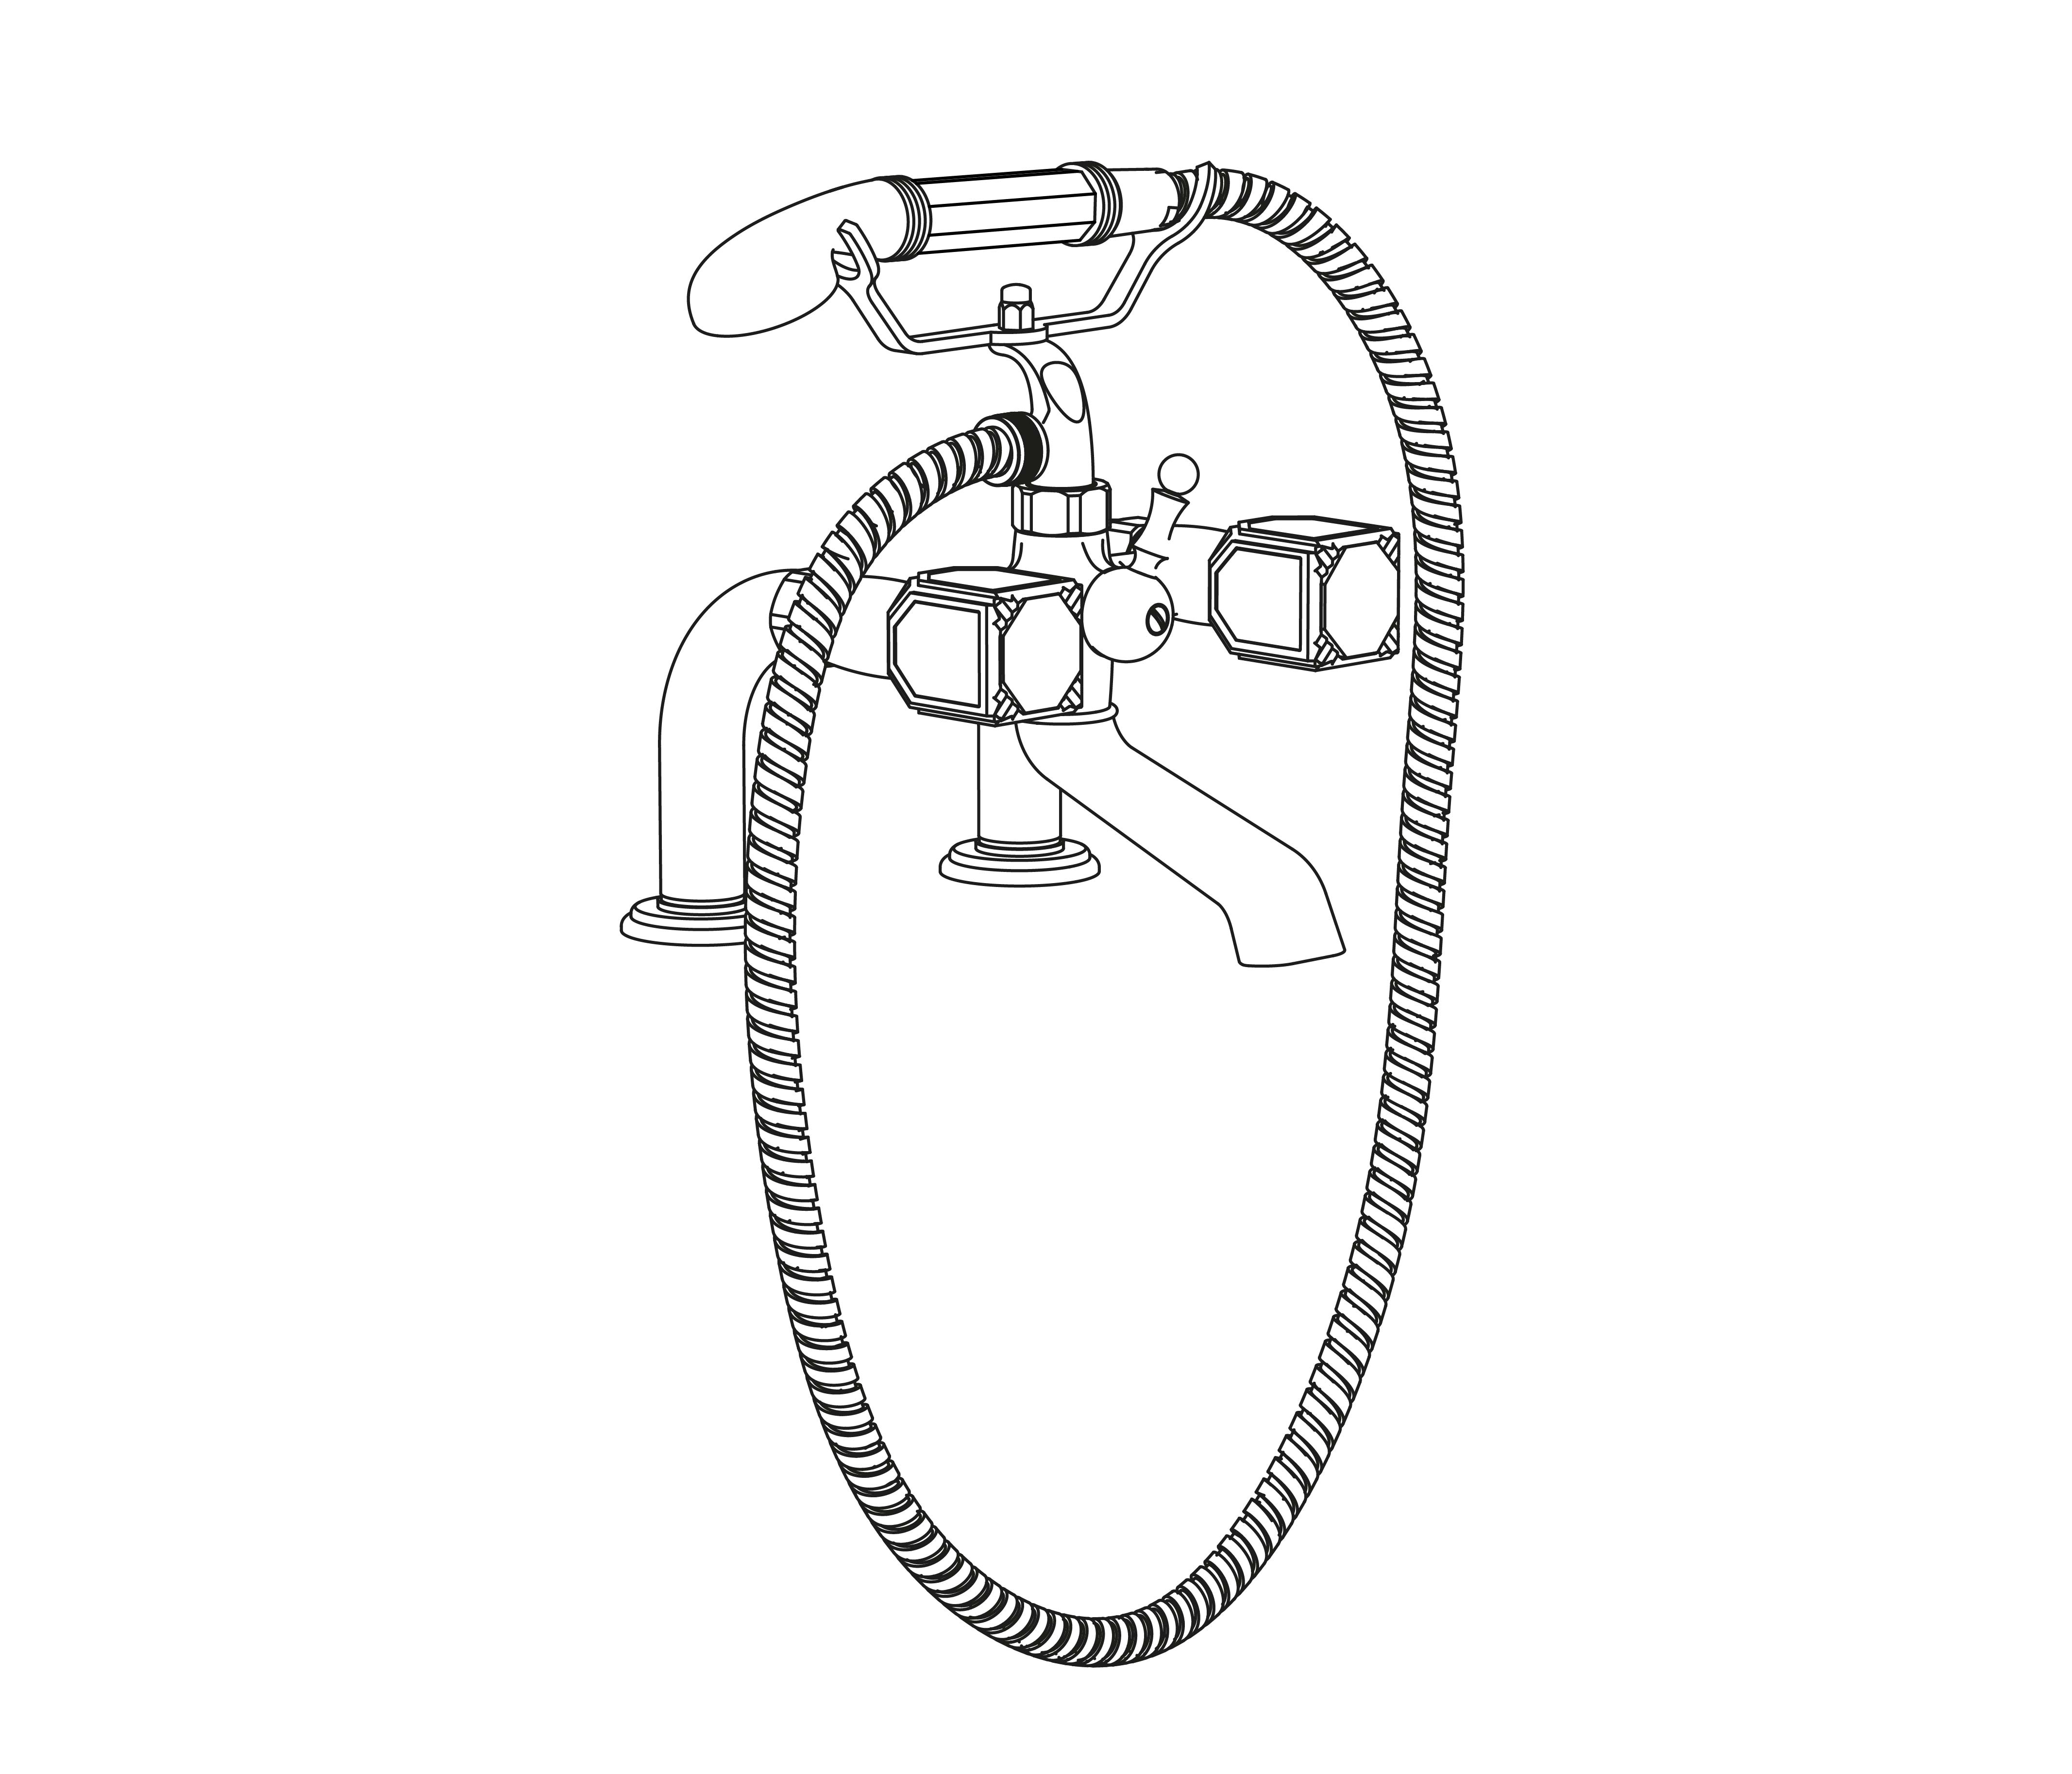 S57-3306 Rim mounted bath and shower mixer